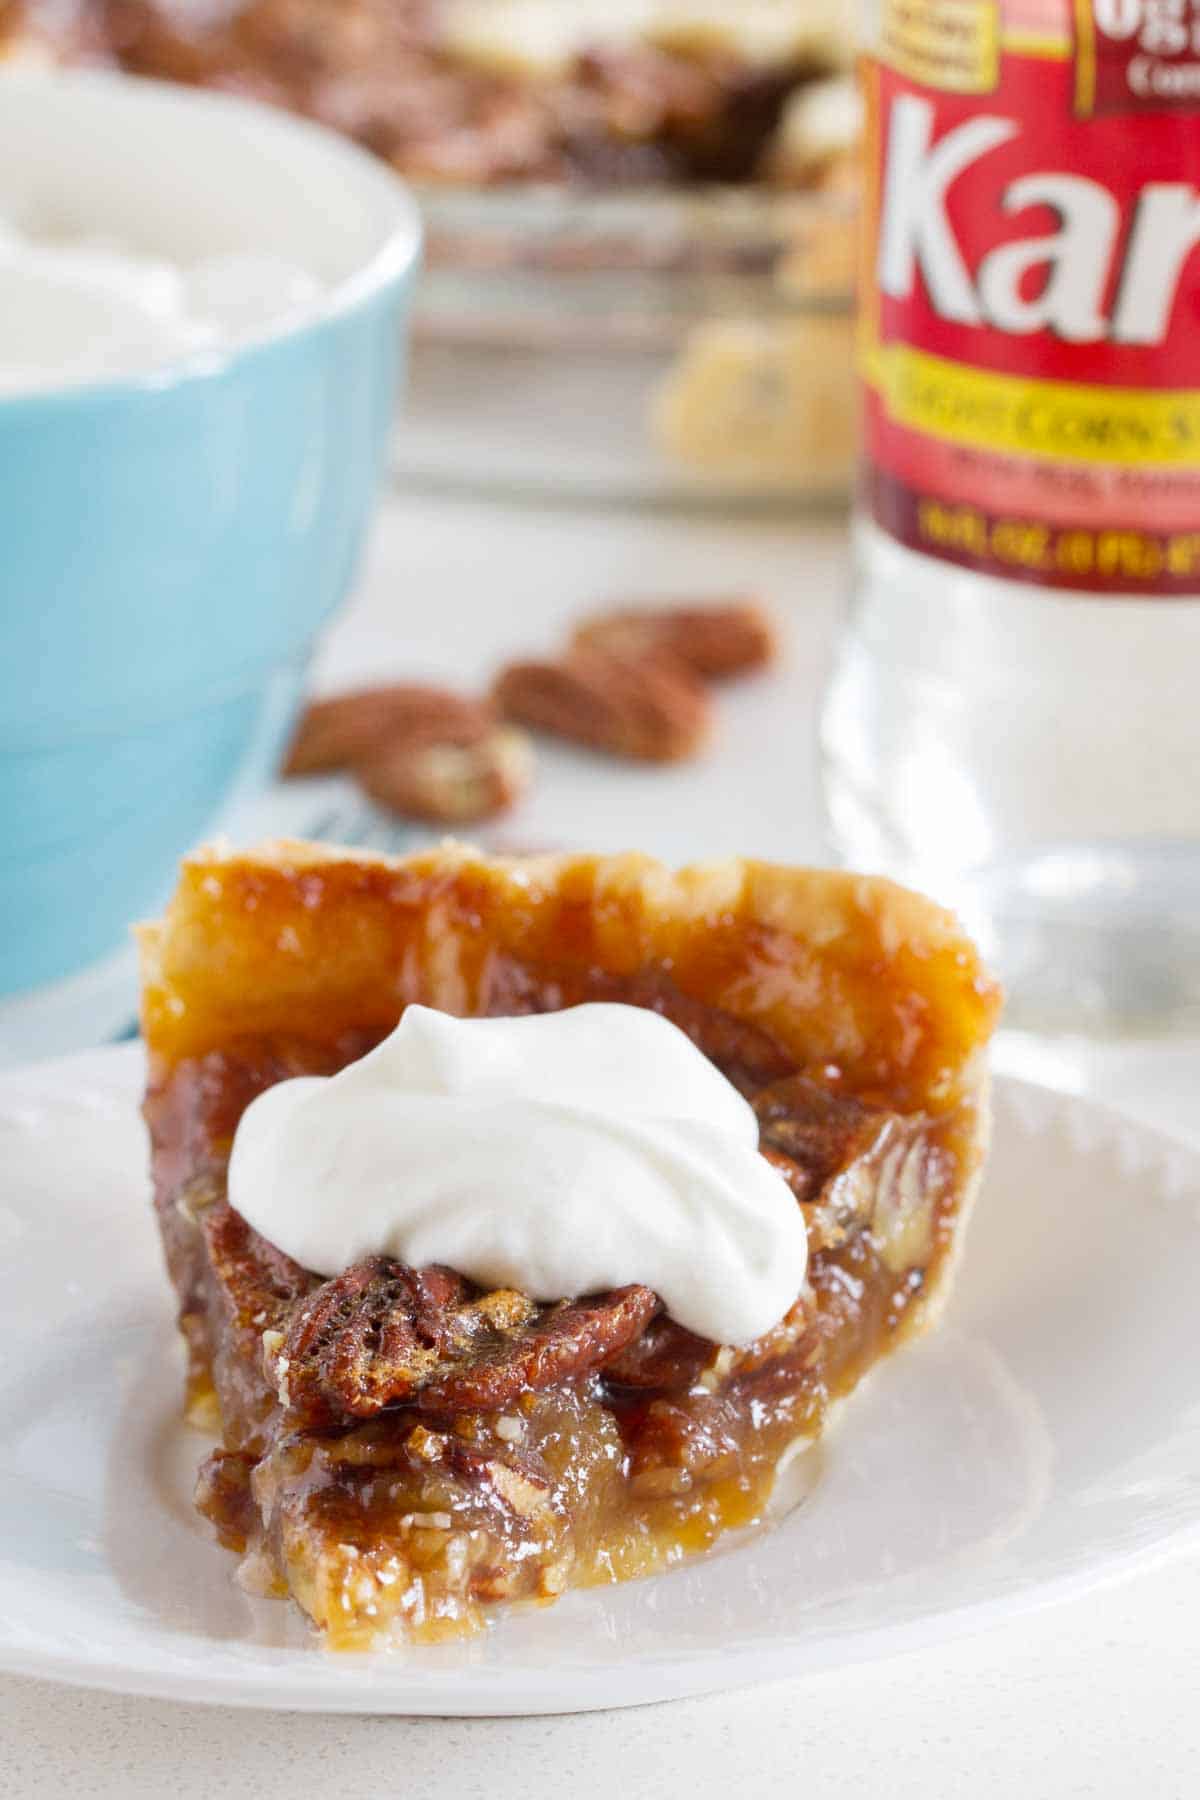 Slice of Pecan Pie topped with whipped cream.